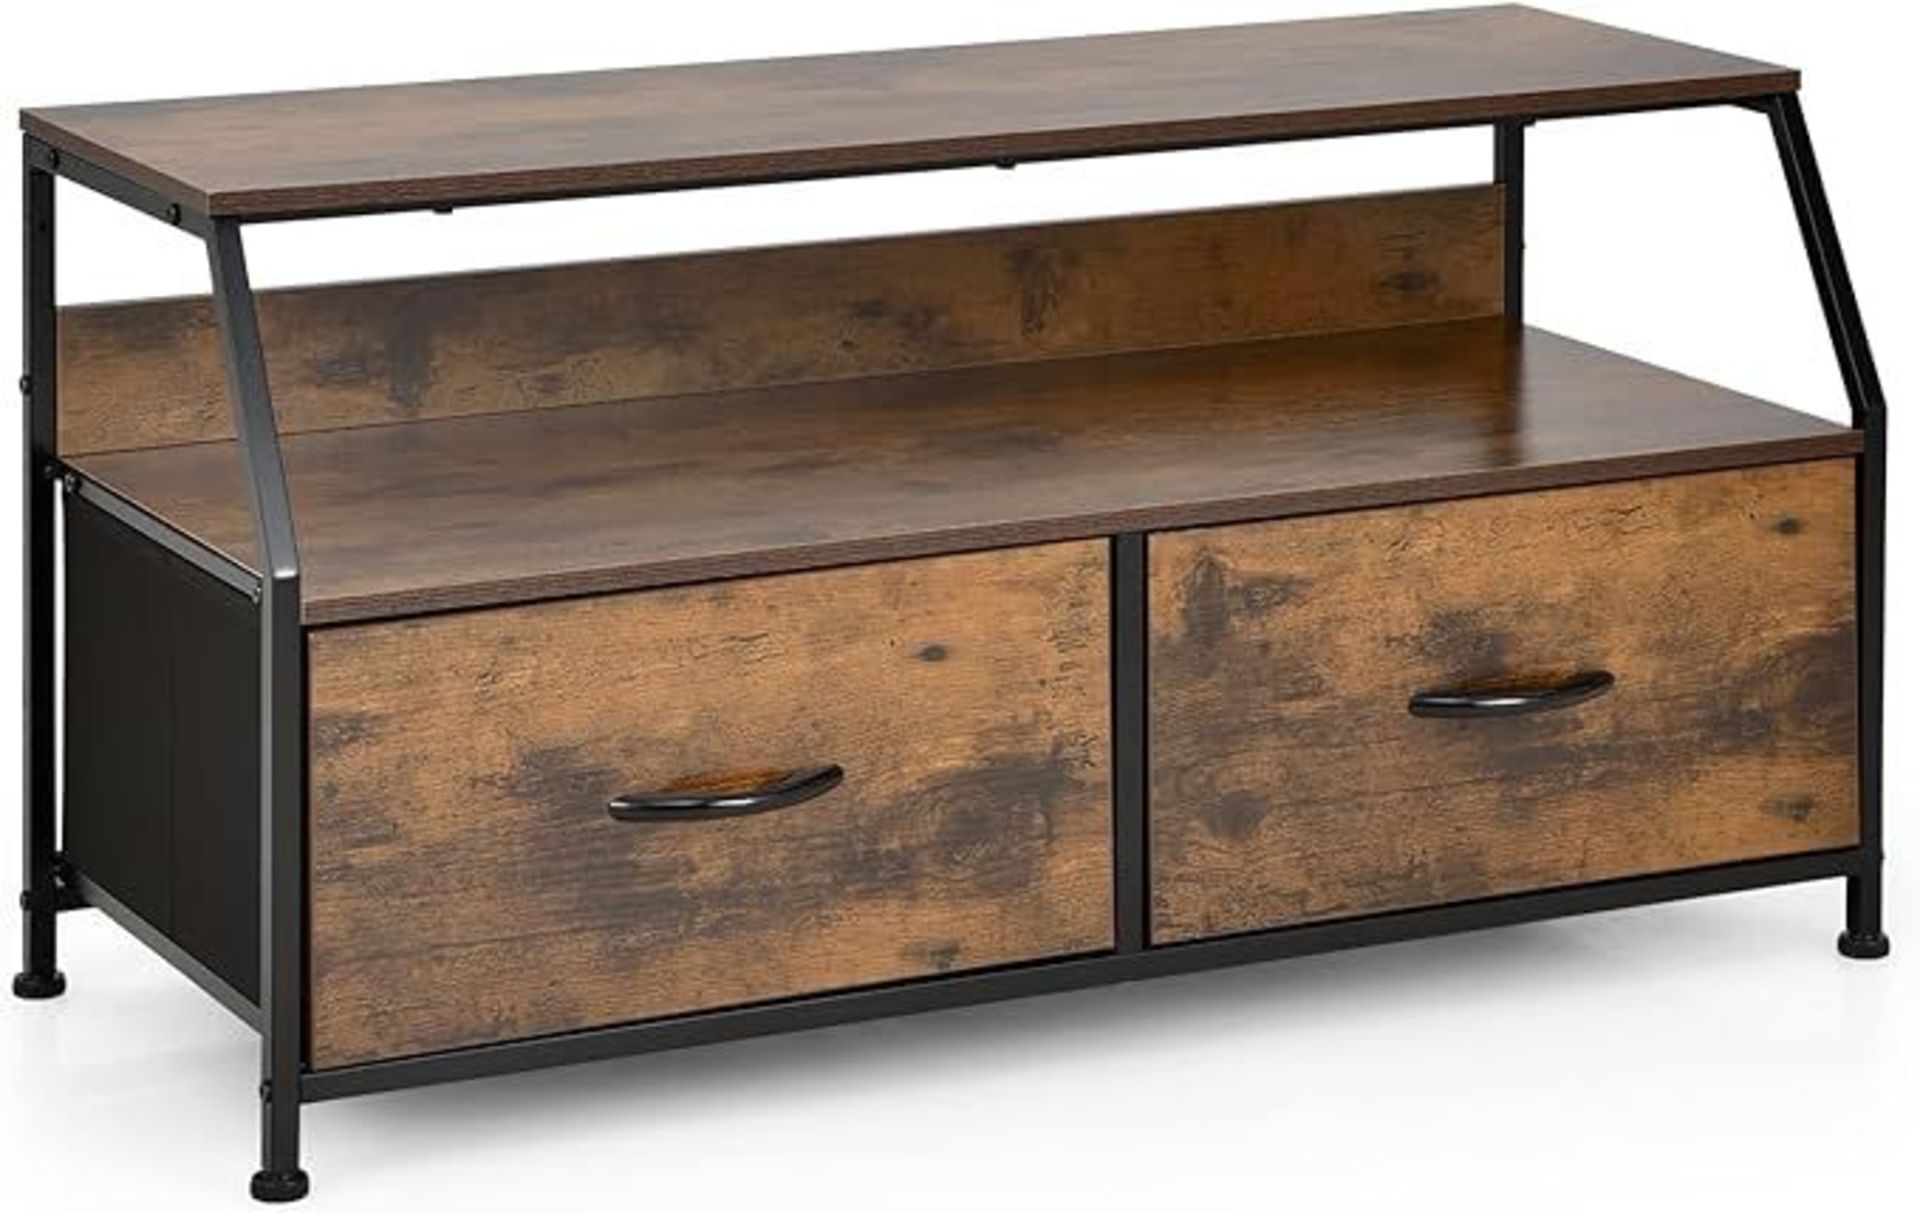 Luxury 2/3-Drawer Dresser, Fabric Chest of Drawers with Wooden Top and Front - ER26., Metal Frame